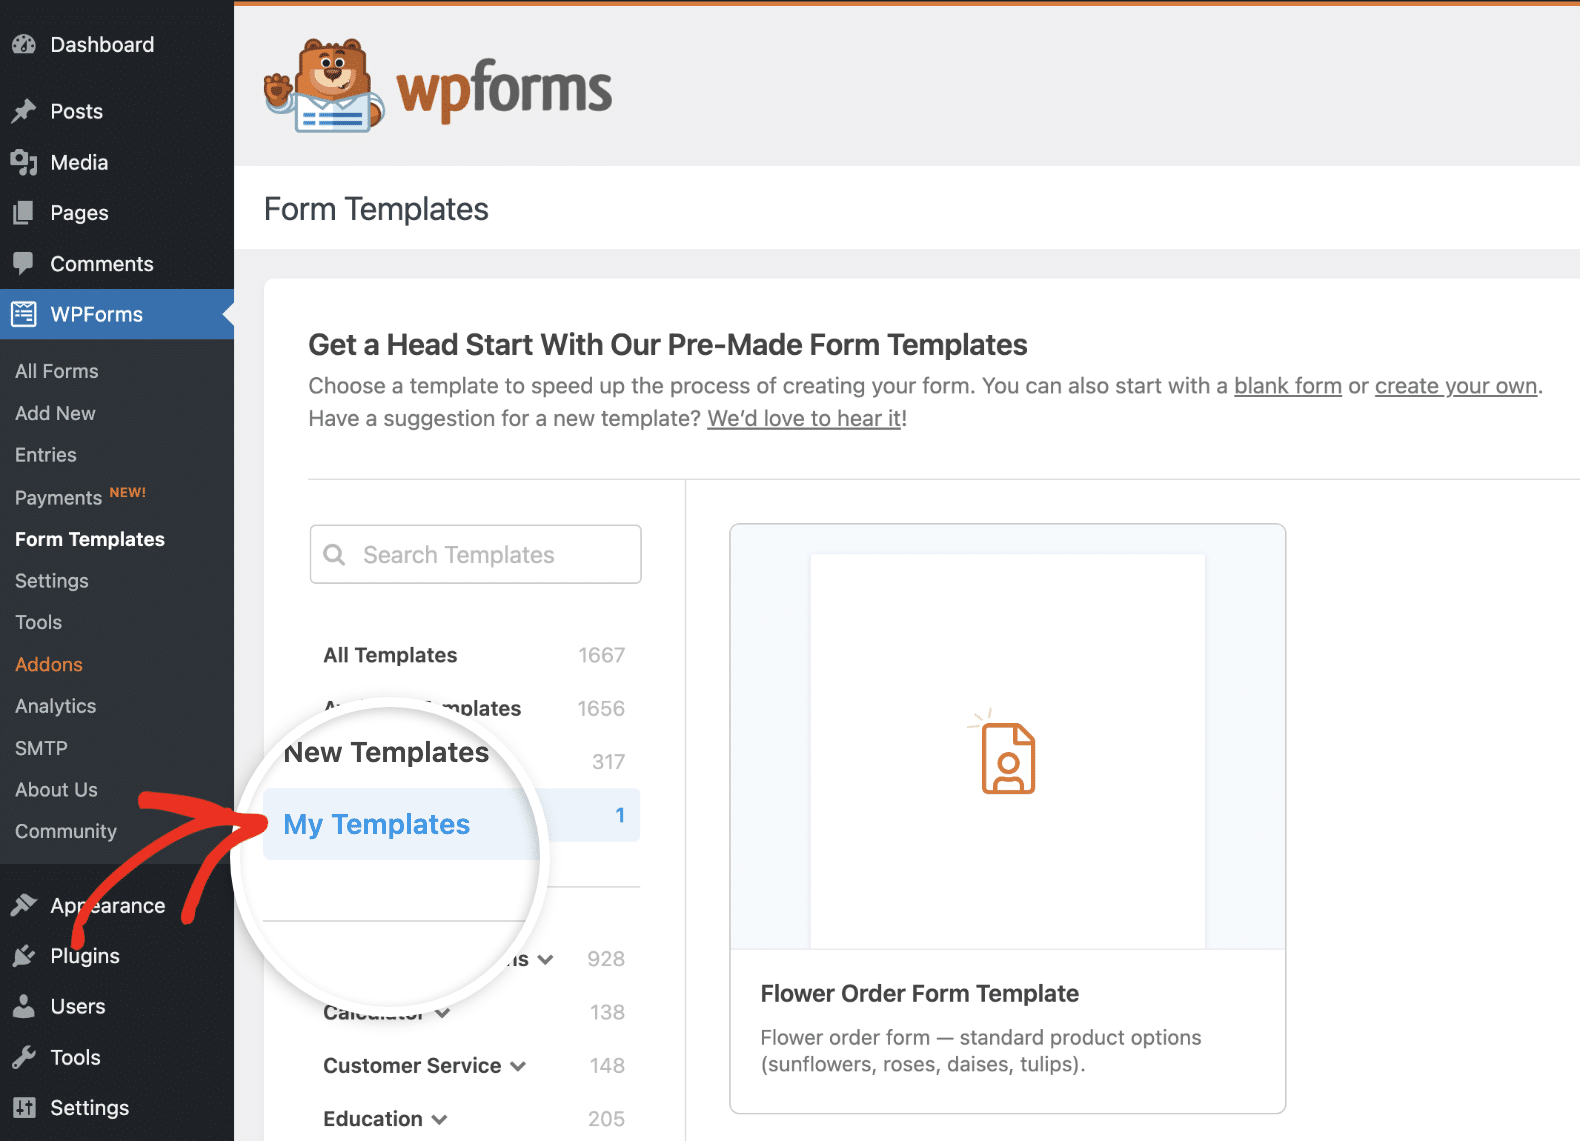 Viewing custom form templates in WPForms